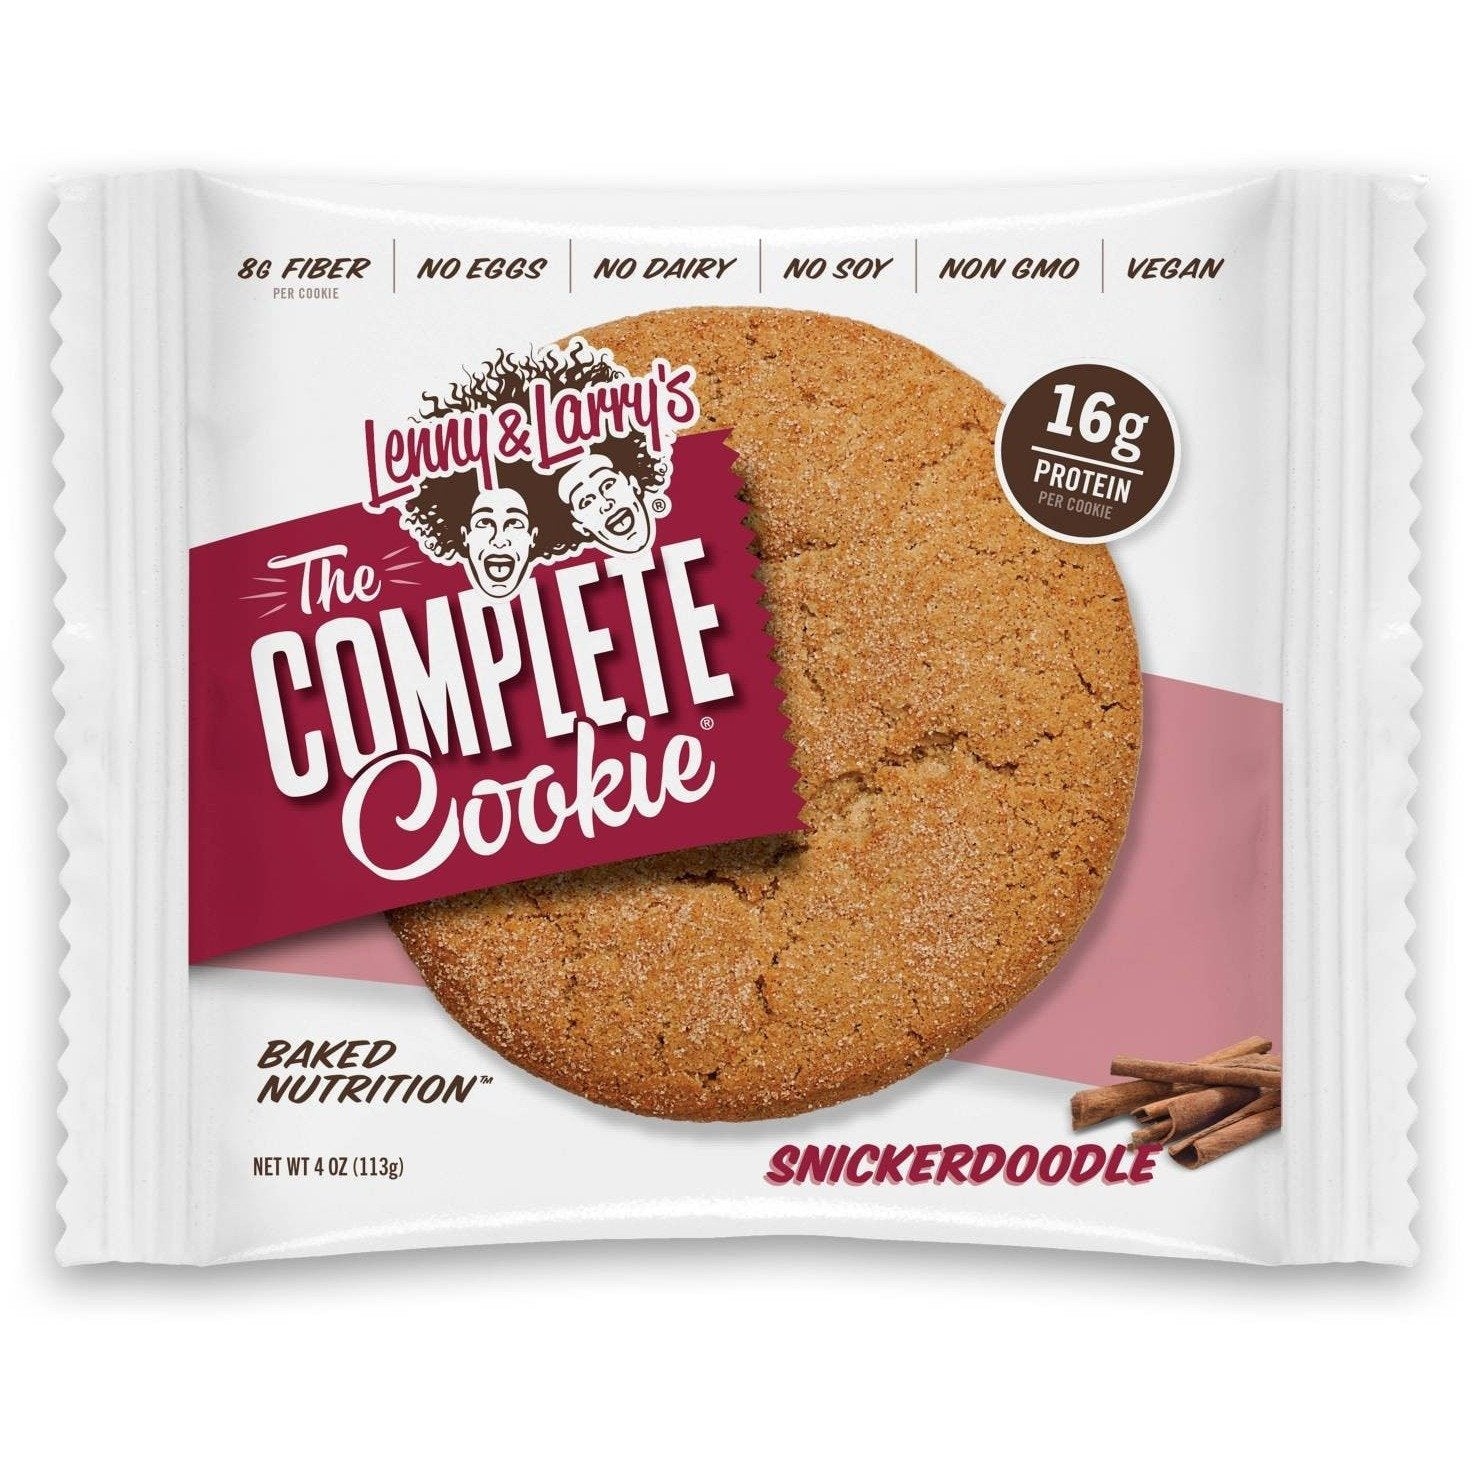 Lenny & Larry's Vegan Protein Cookie (1 cookie) Protein Snacks Snickerdoodle Lenny & Larry